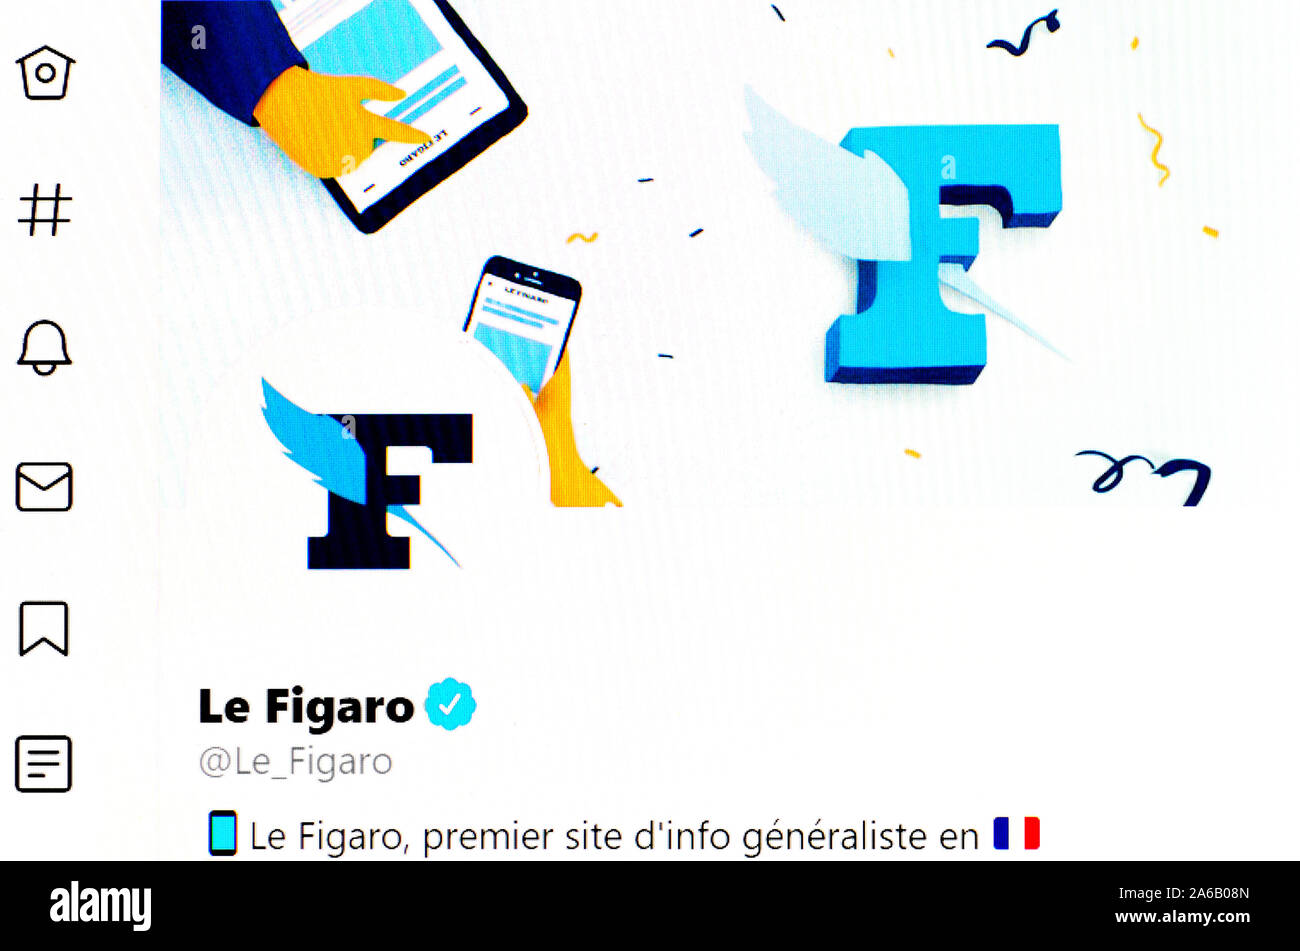 Twitter page (Oct 2019) Le Figaro Stock Photo